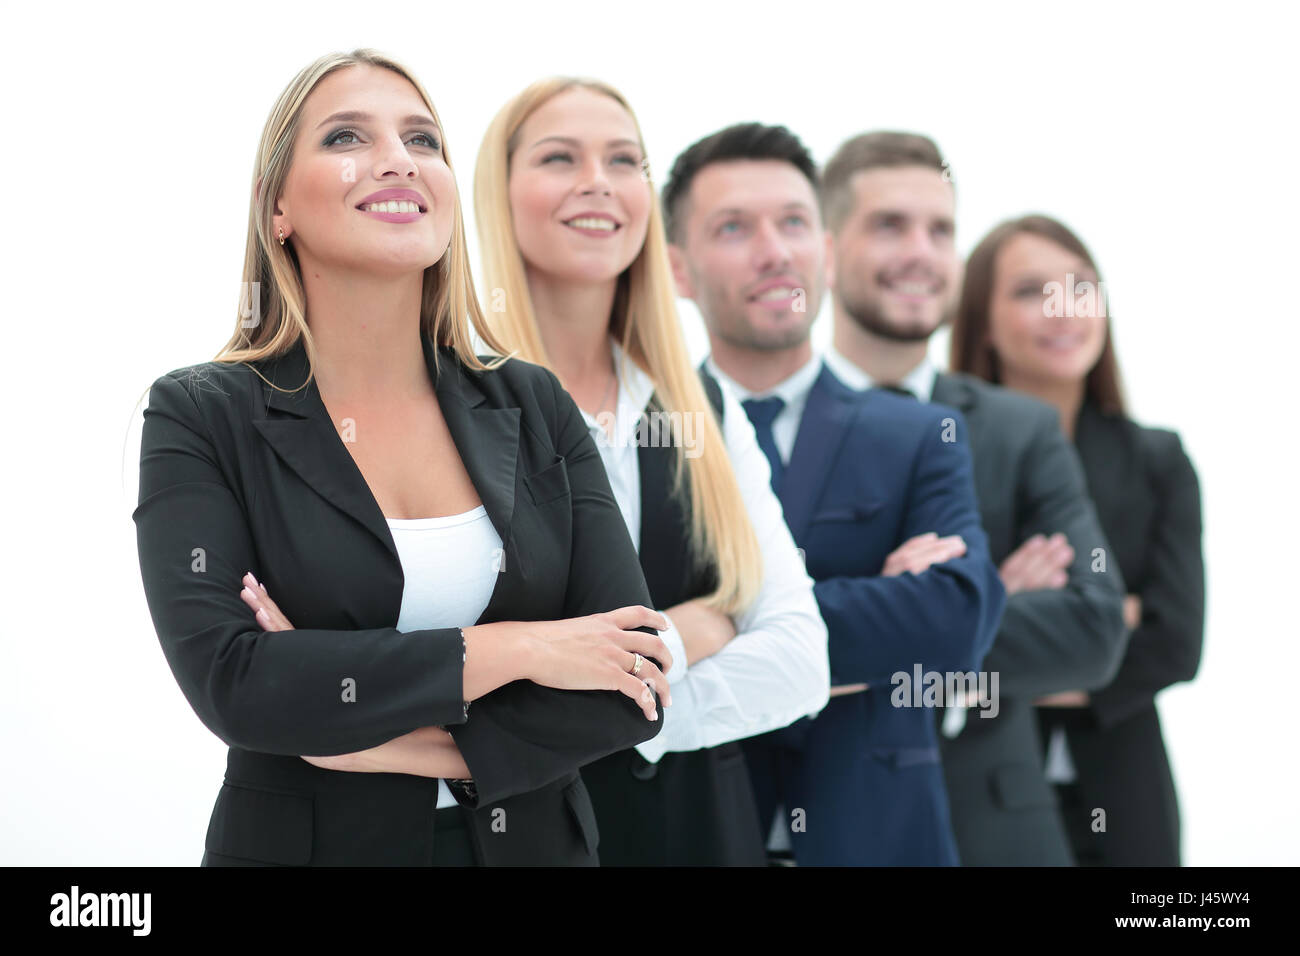 Team of successful and confident people posing on a white backgr Stock Photo